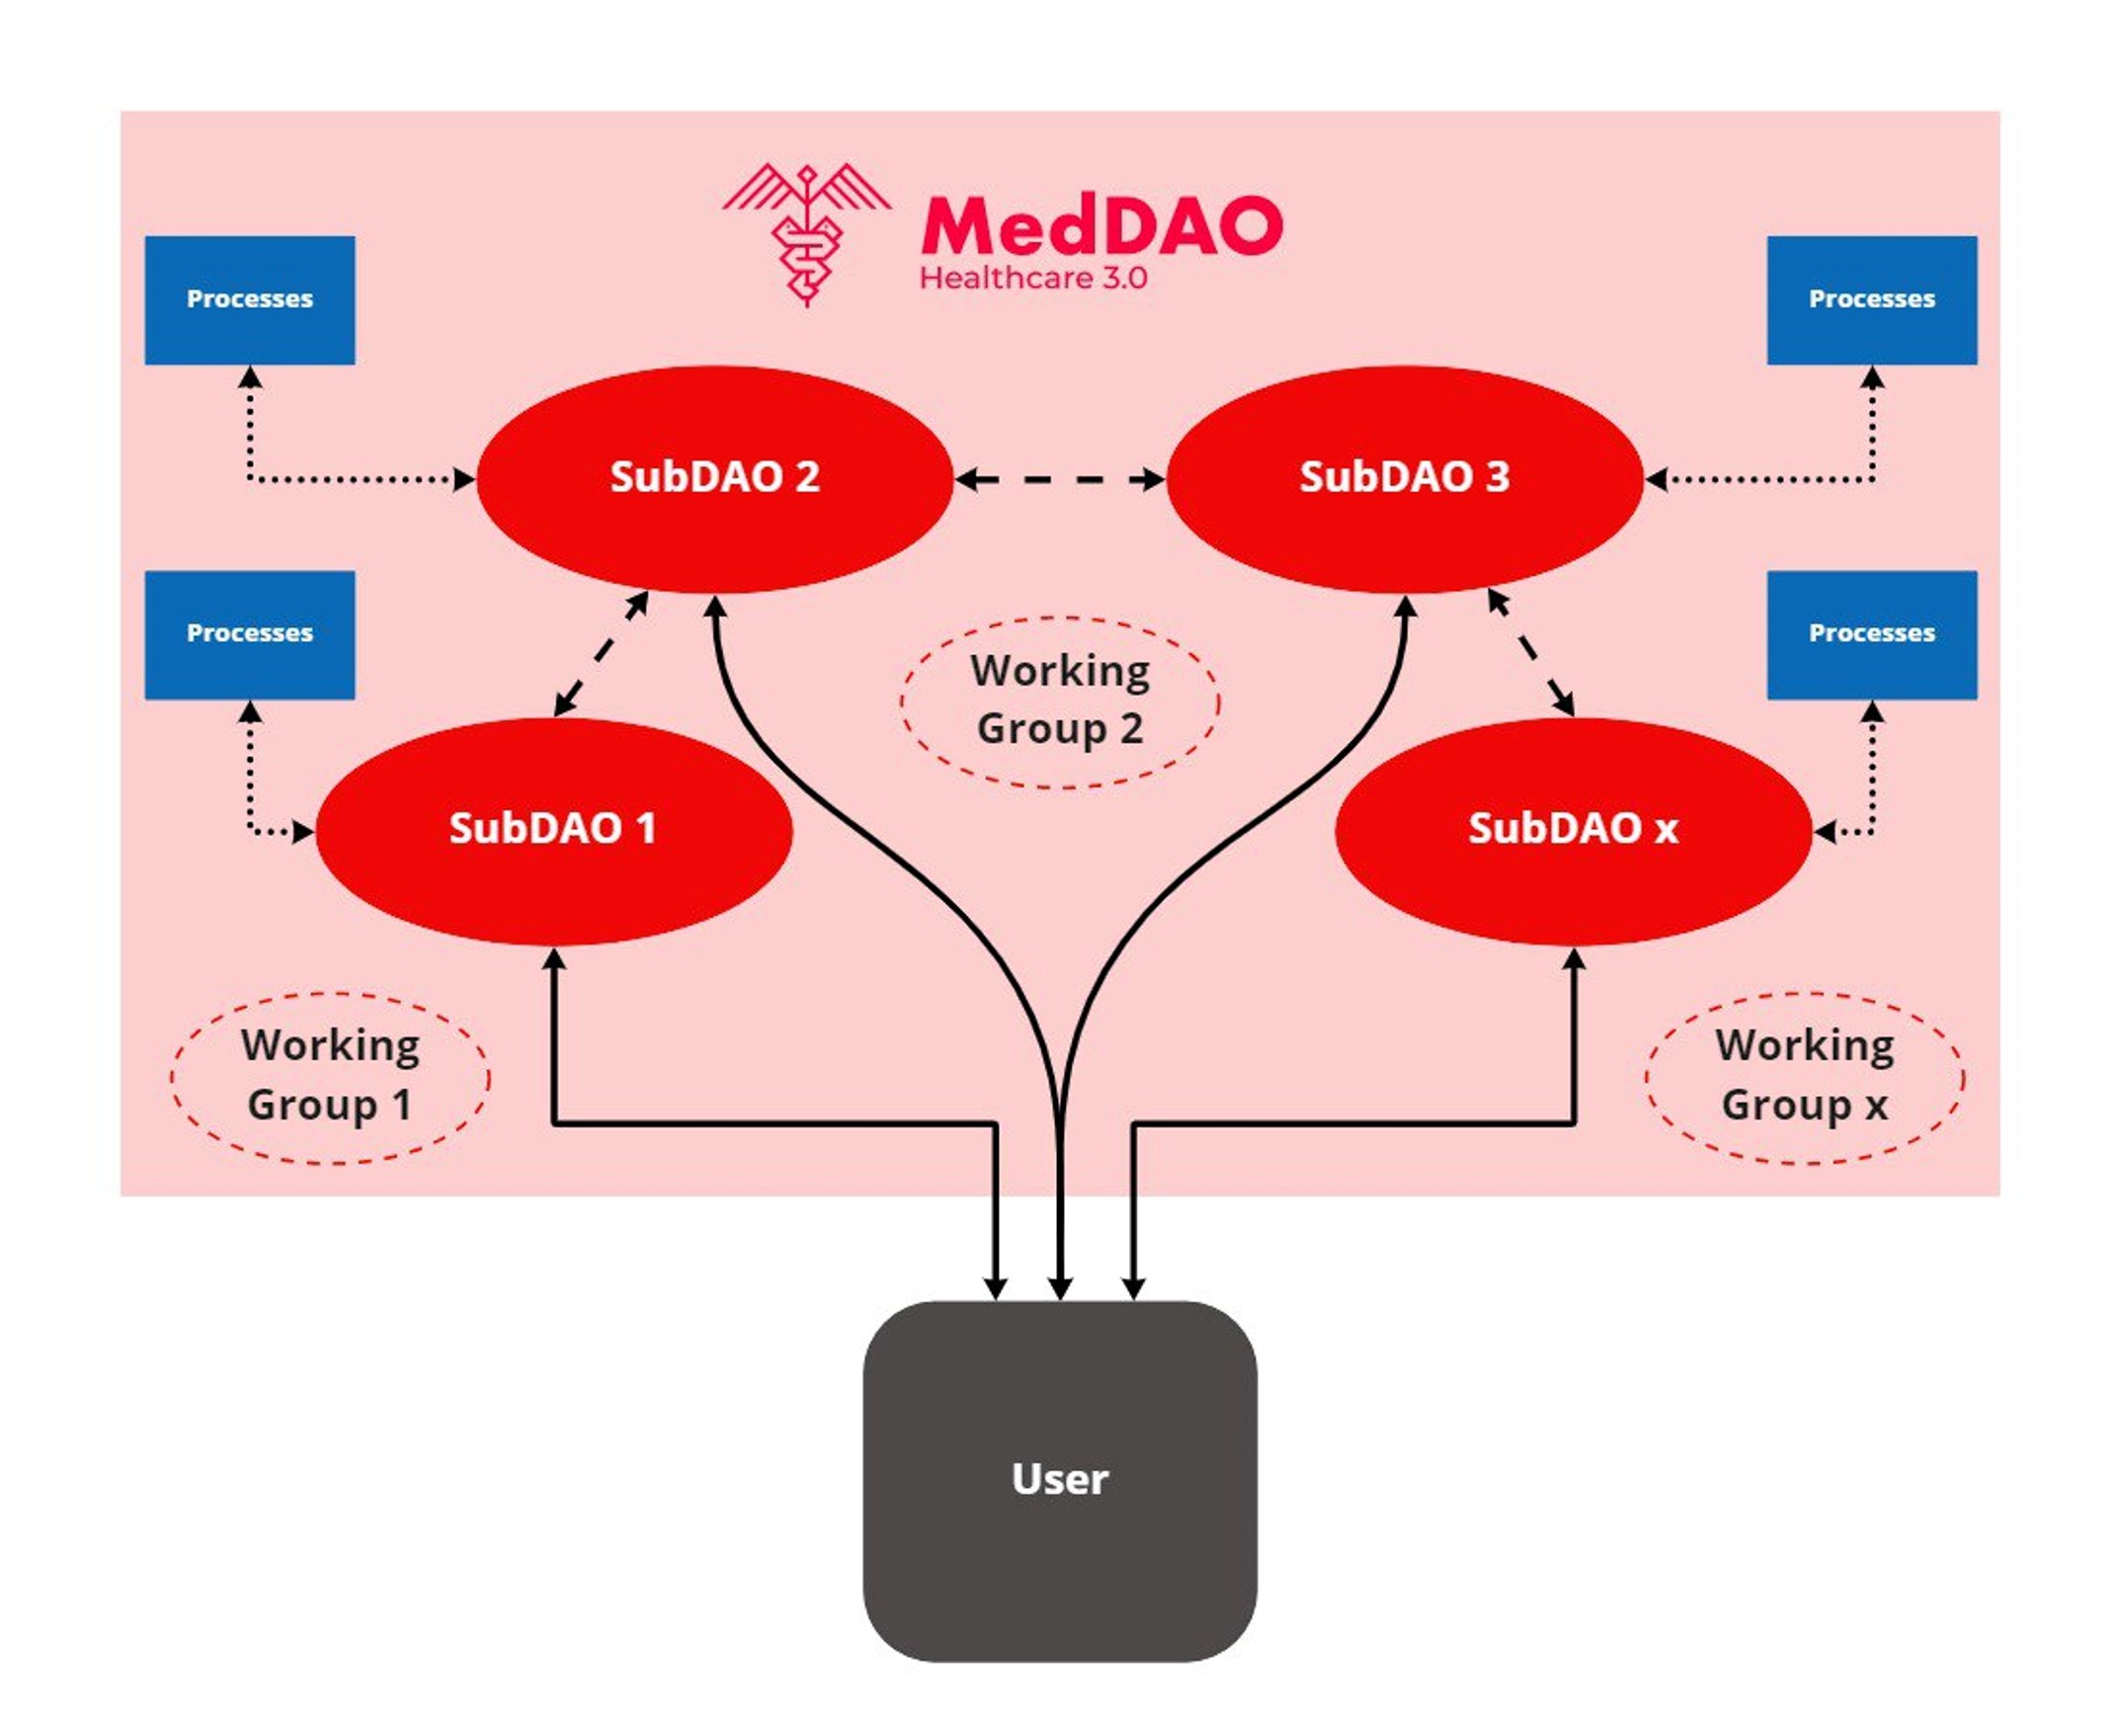 MedDAOs architecture consists of a superDAO (MedDAO) and multiple subDAOs